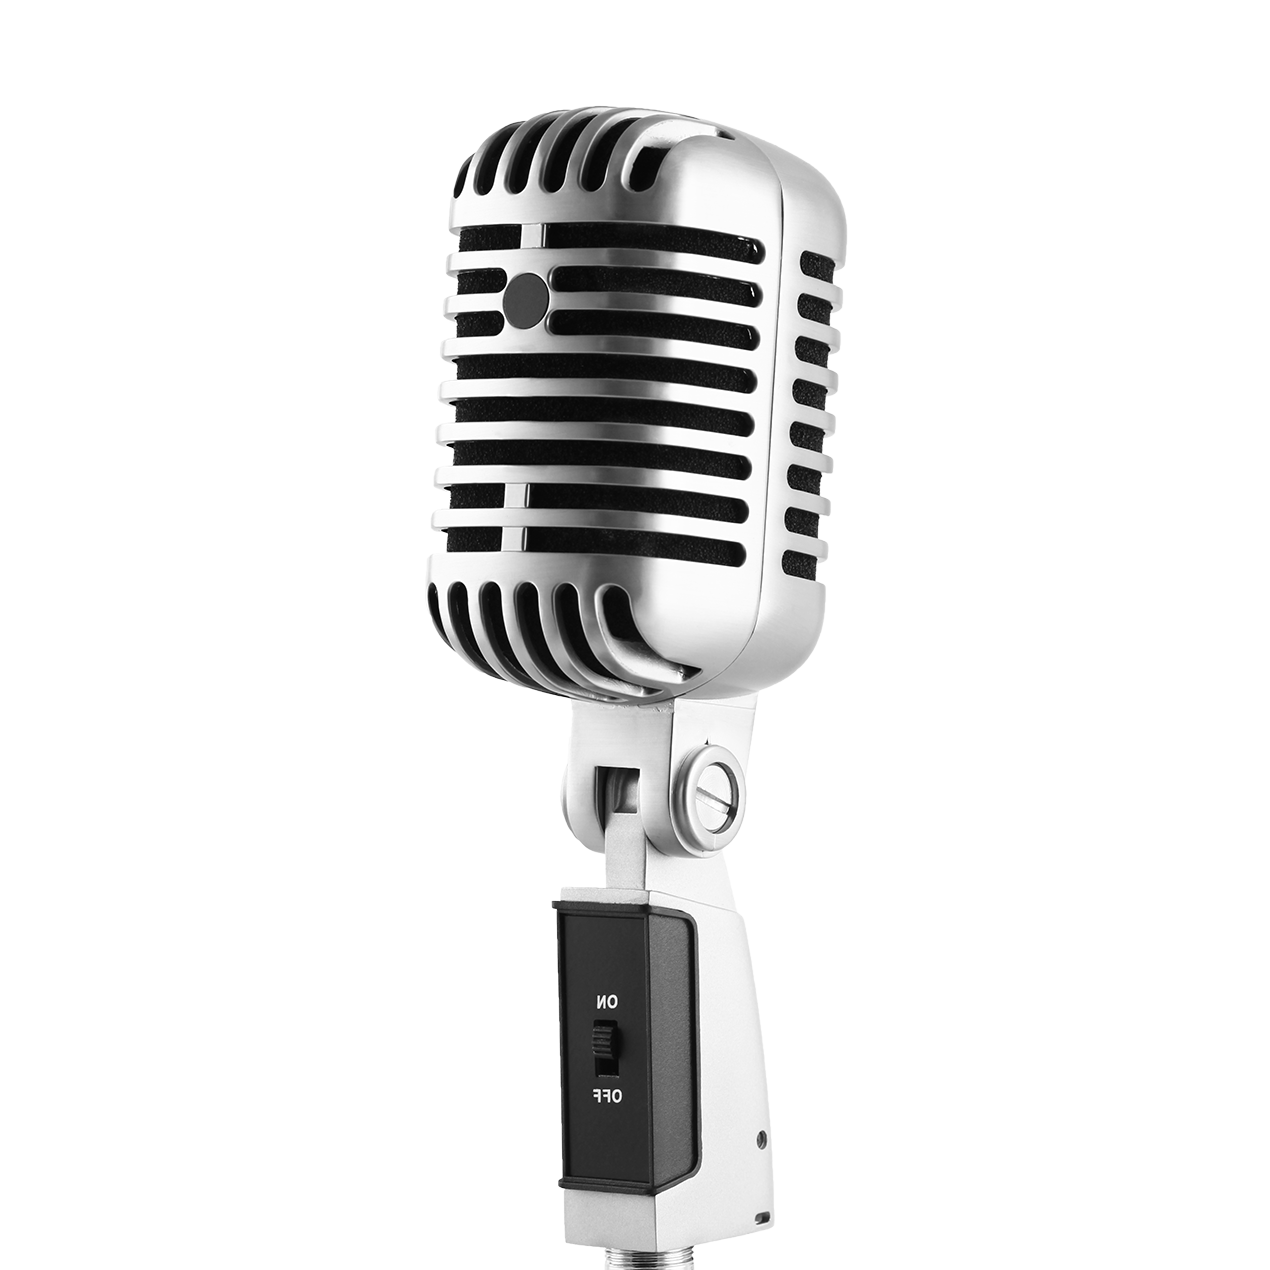 microphone, for librarians alexandria library automation software #13883